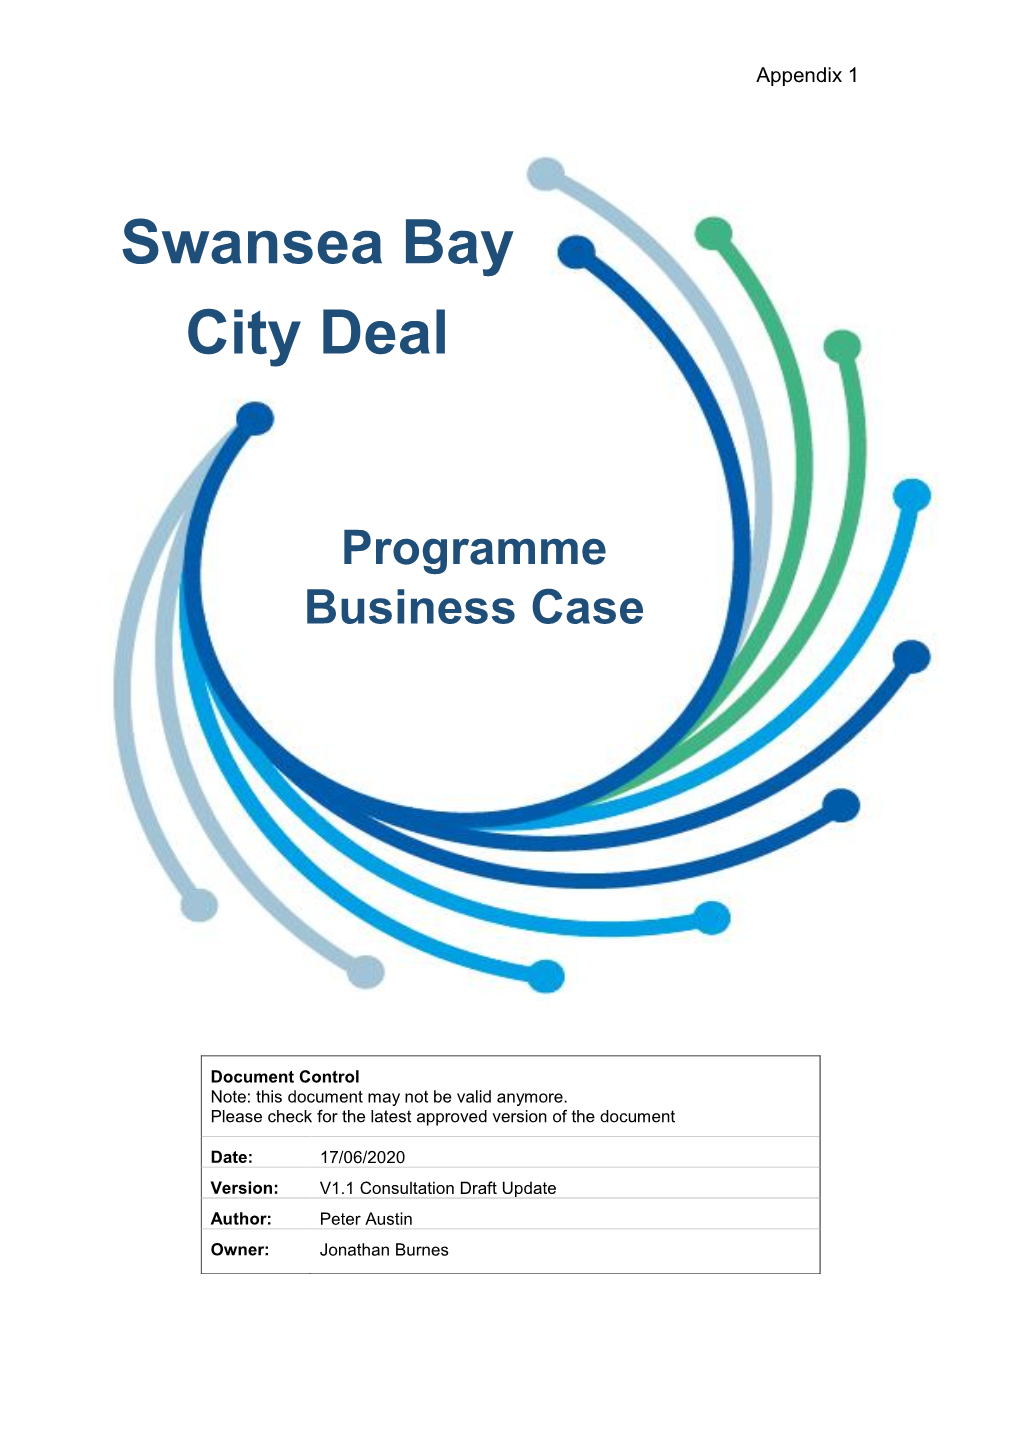 Swansea Bay City Deal Programme Five Stage Business Case